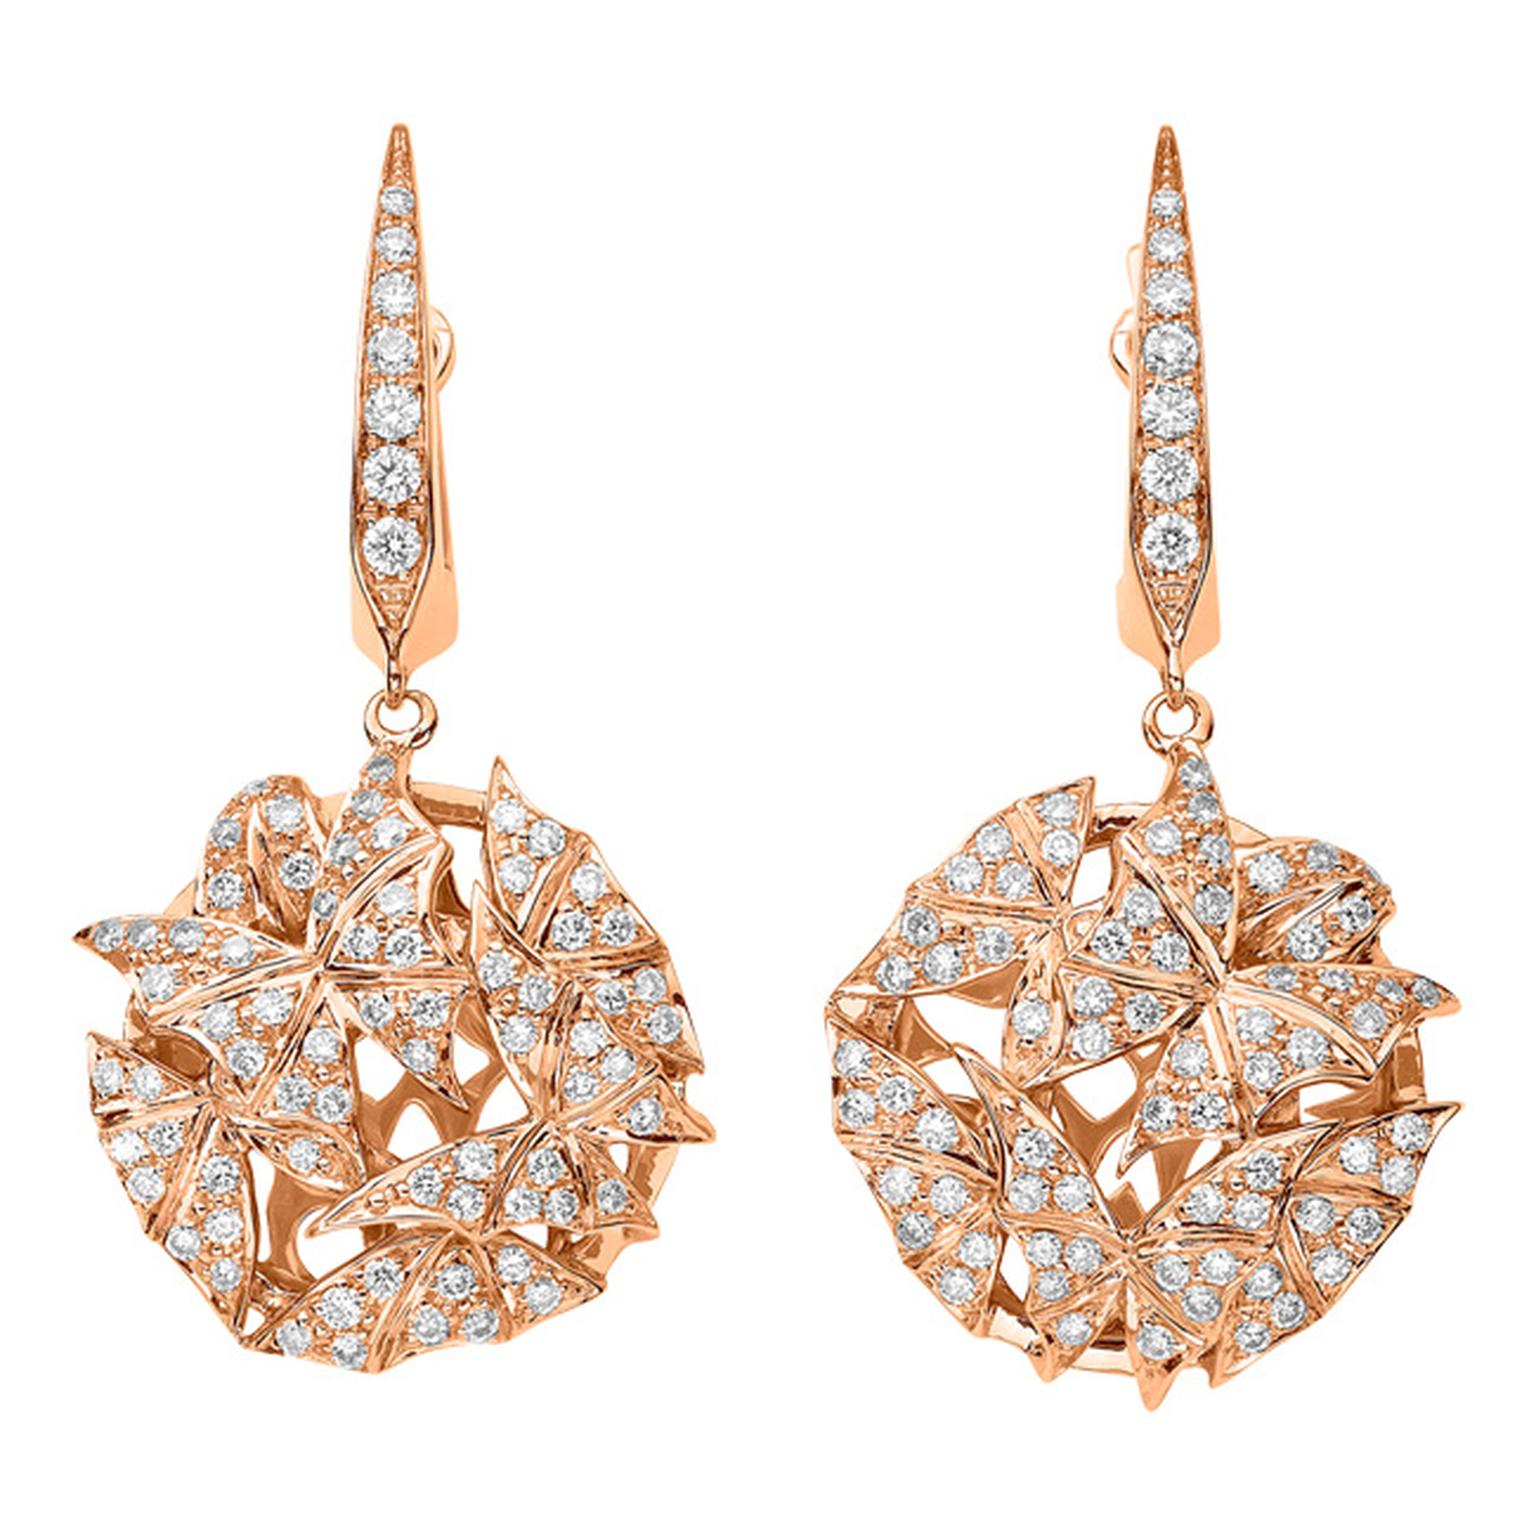 Stephen Webster Fly by Night Mothball earrings in rose gold and diamonds_20131220_Main